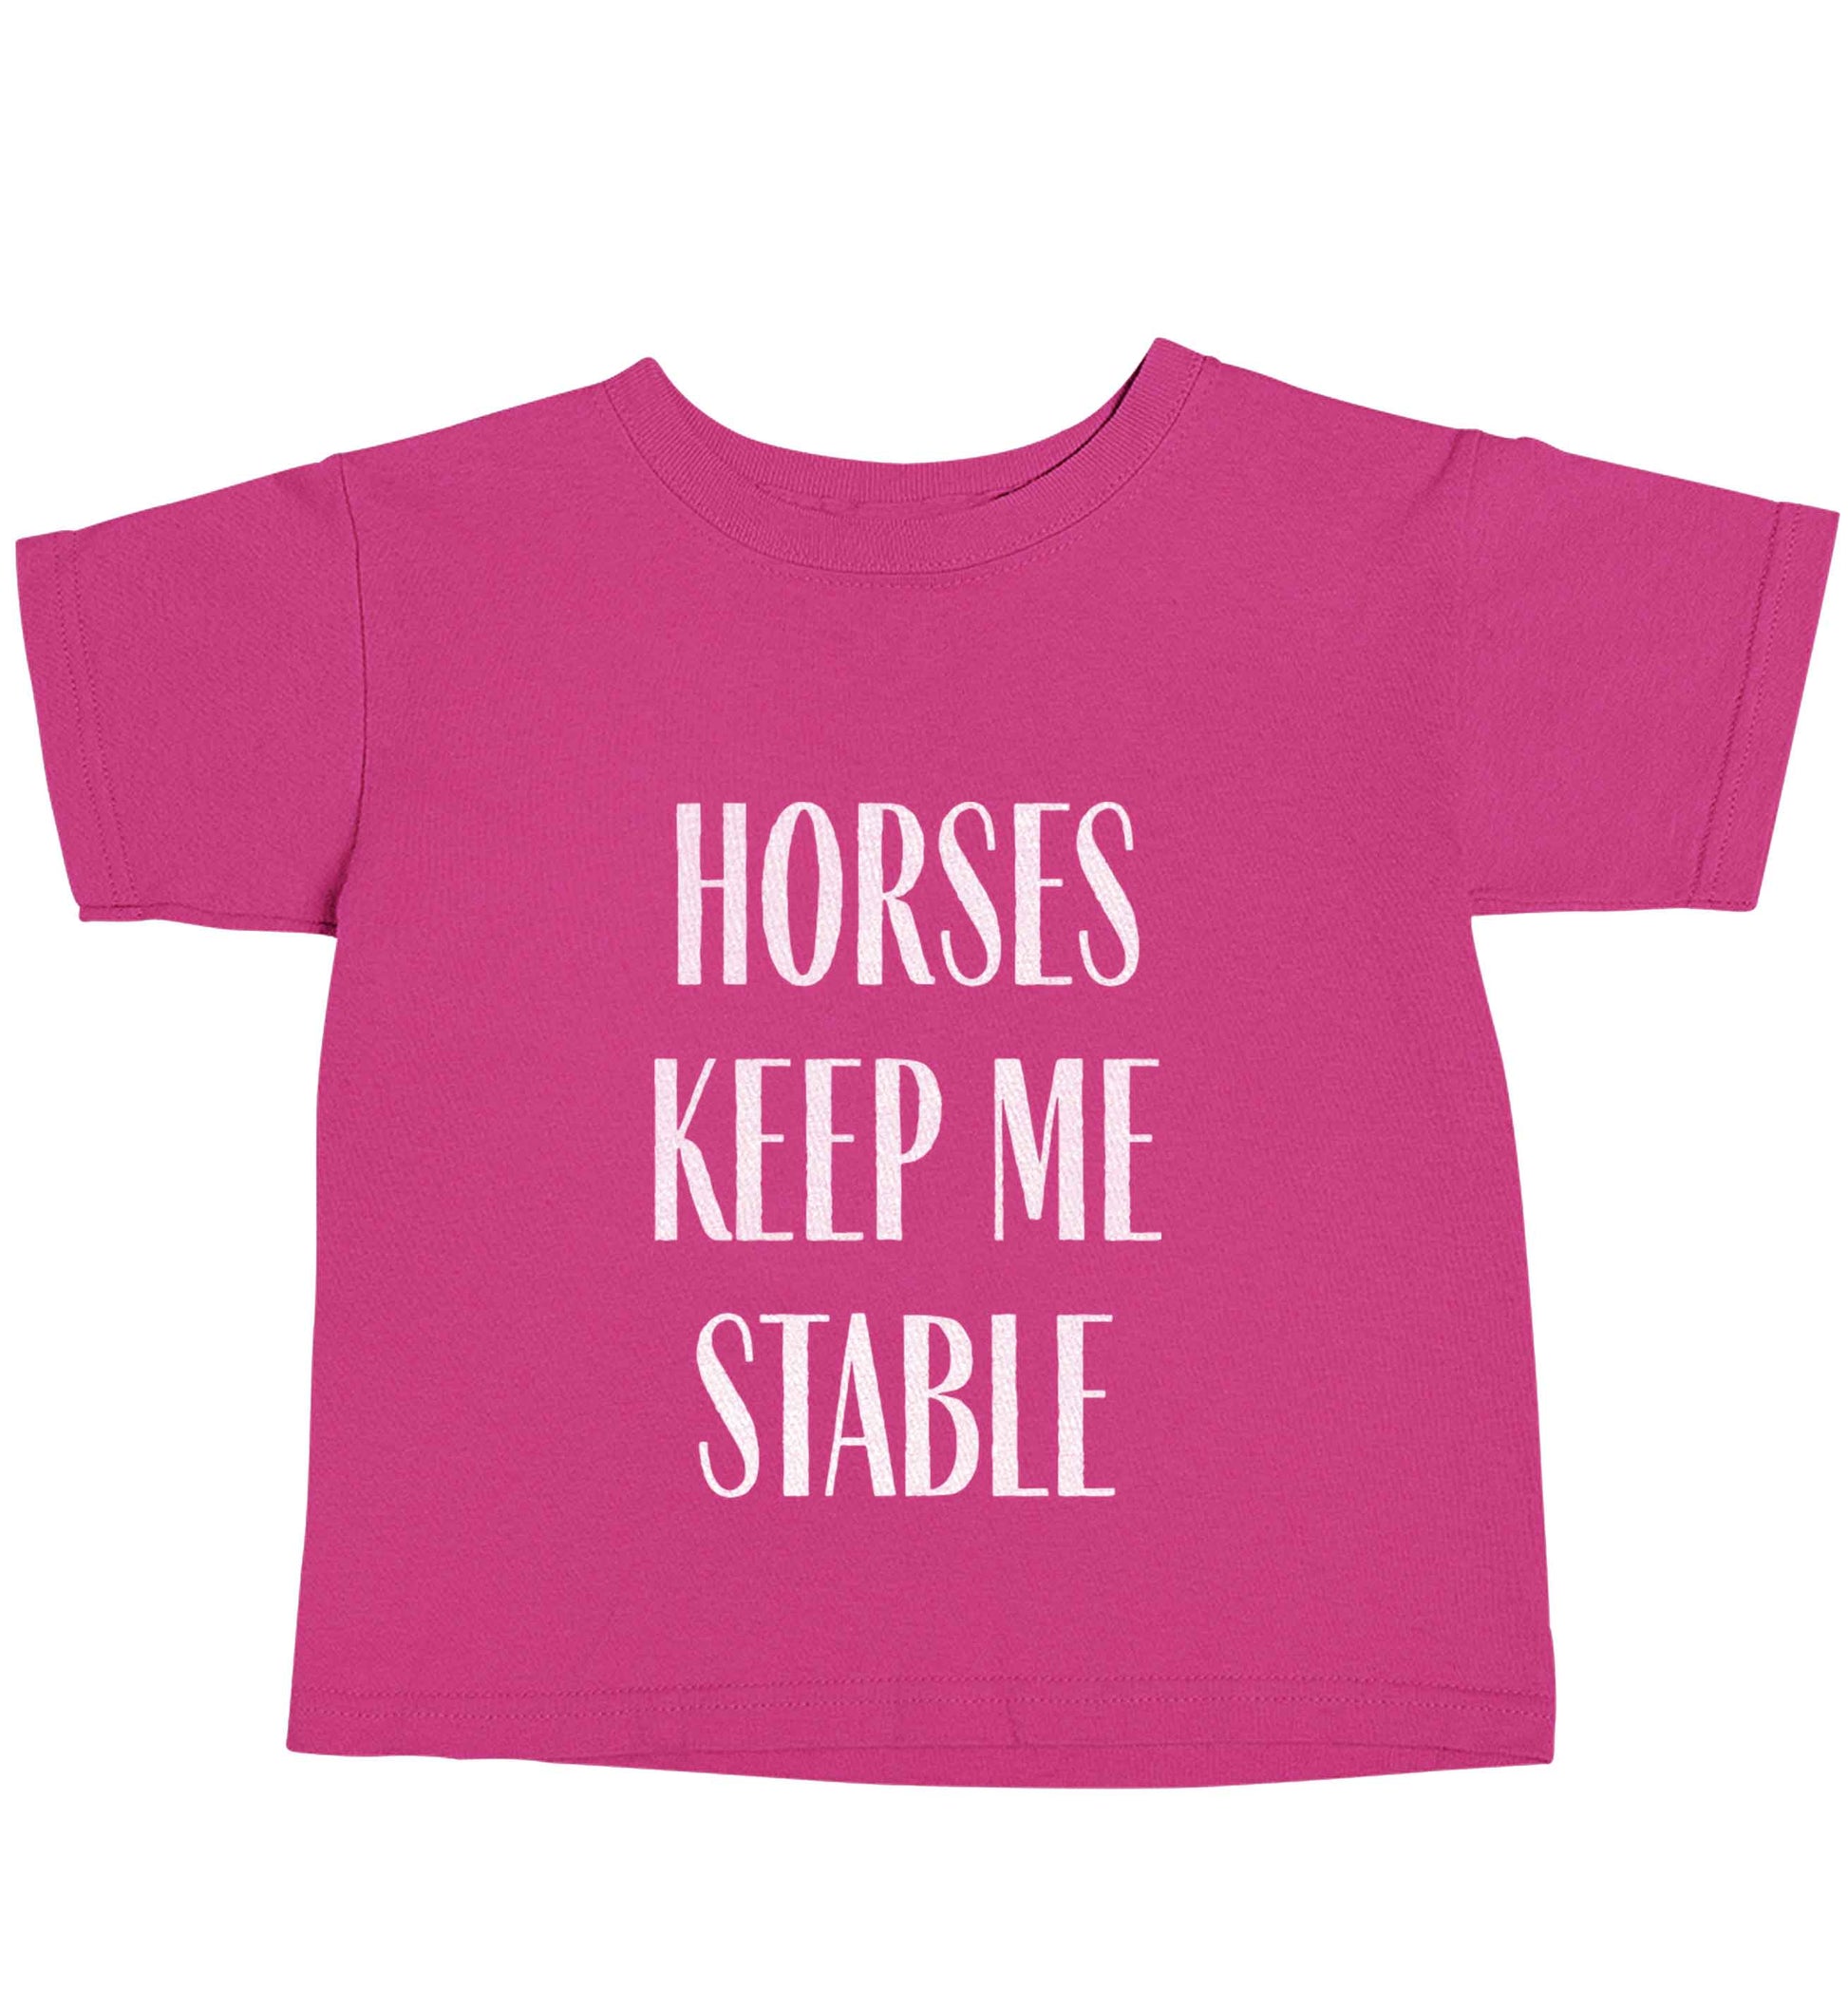 Horses keep me stable pink baby toddler Tshirt 2 Years